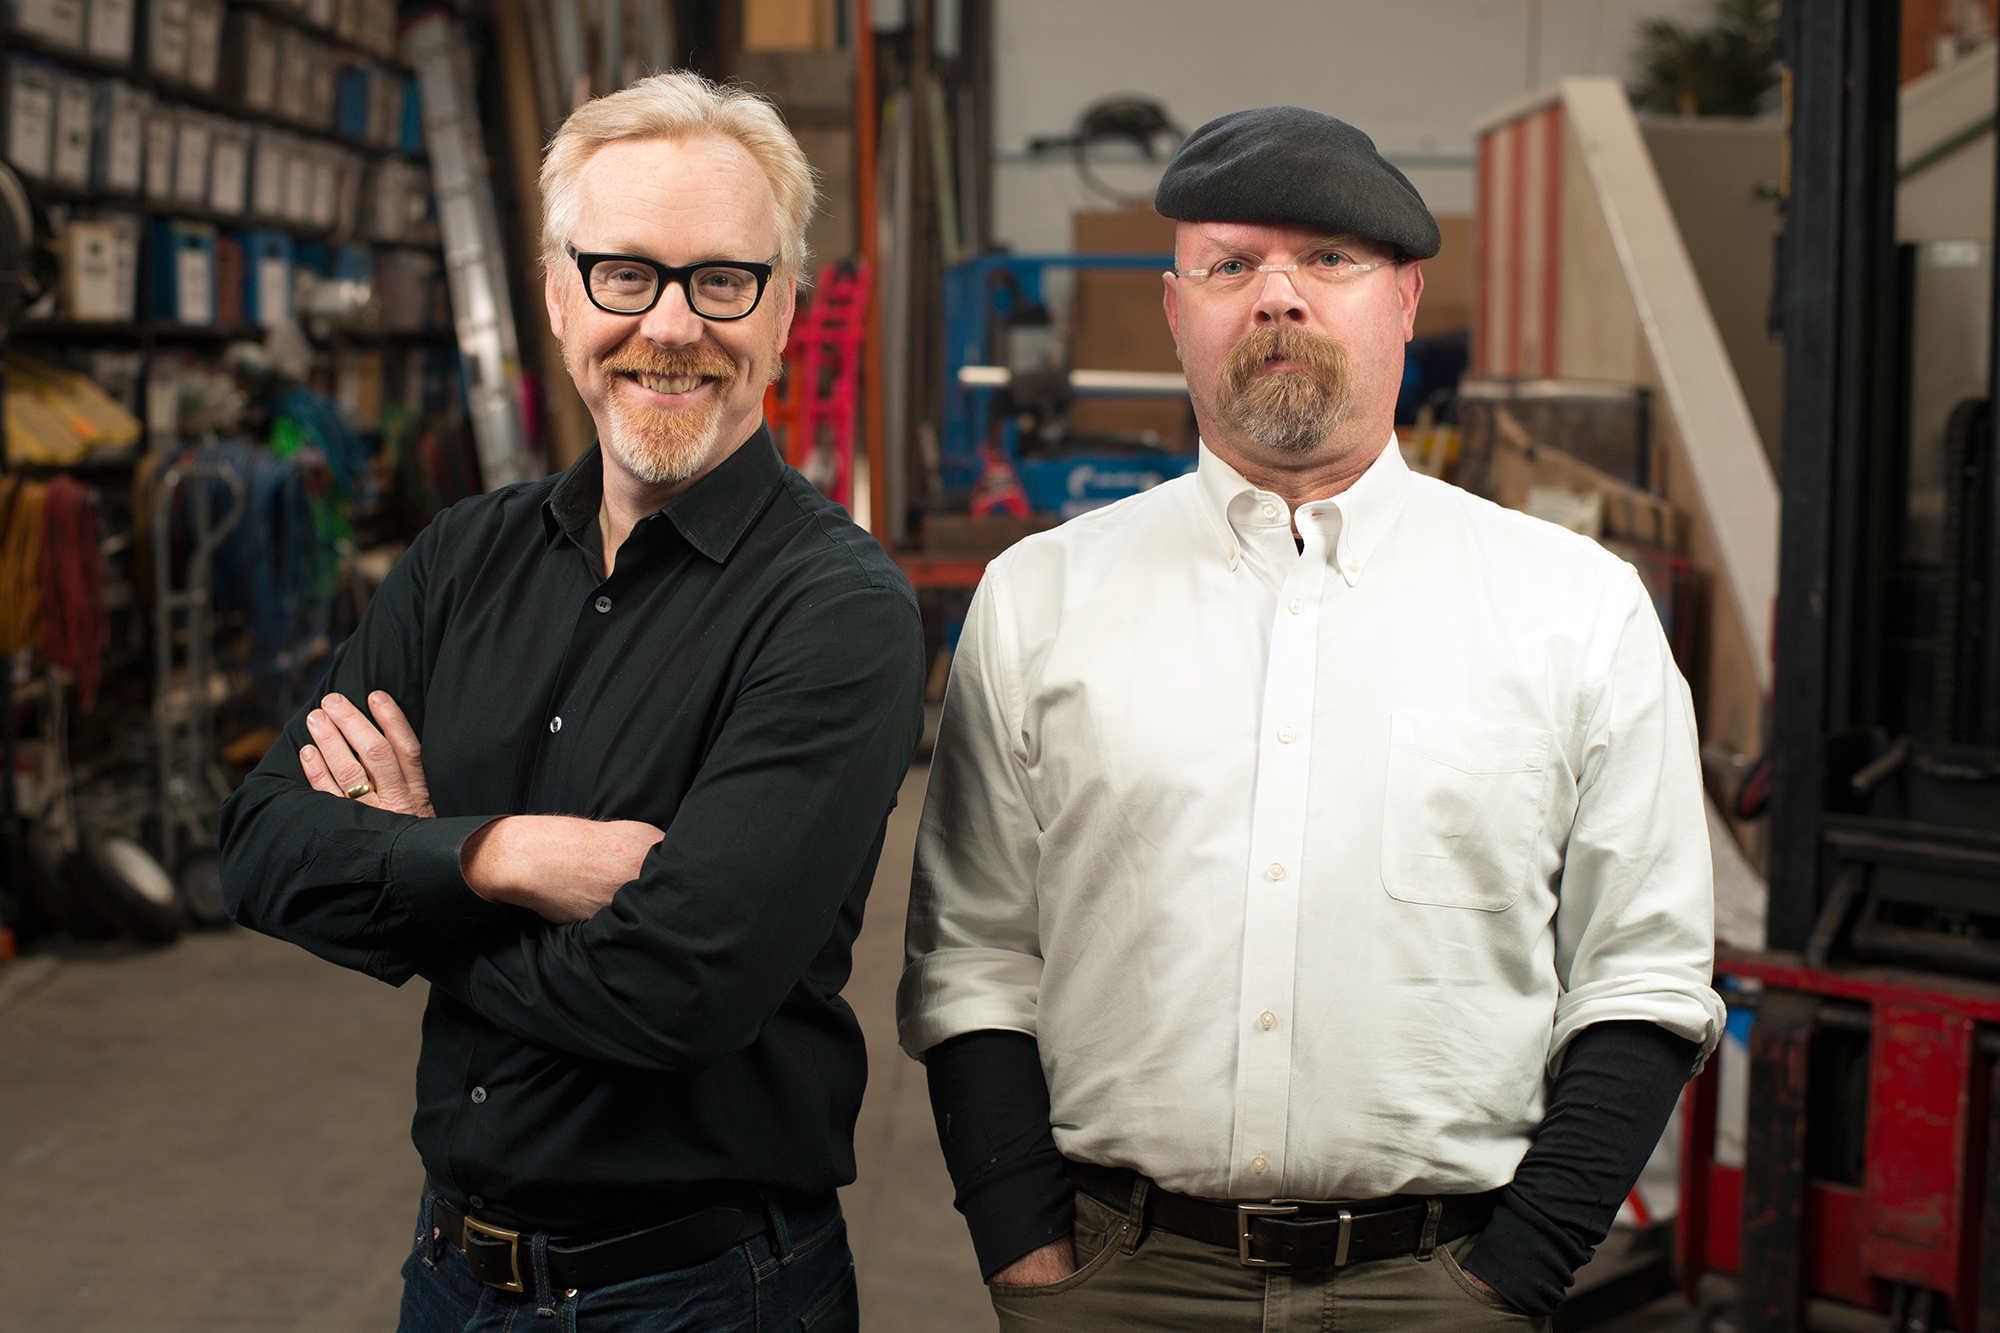 mythbusters-about-the-show-page-image.jpg